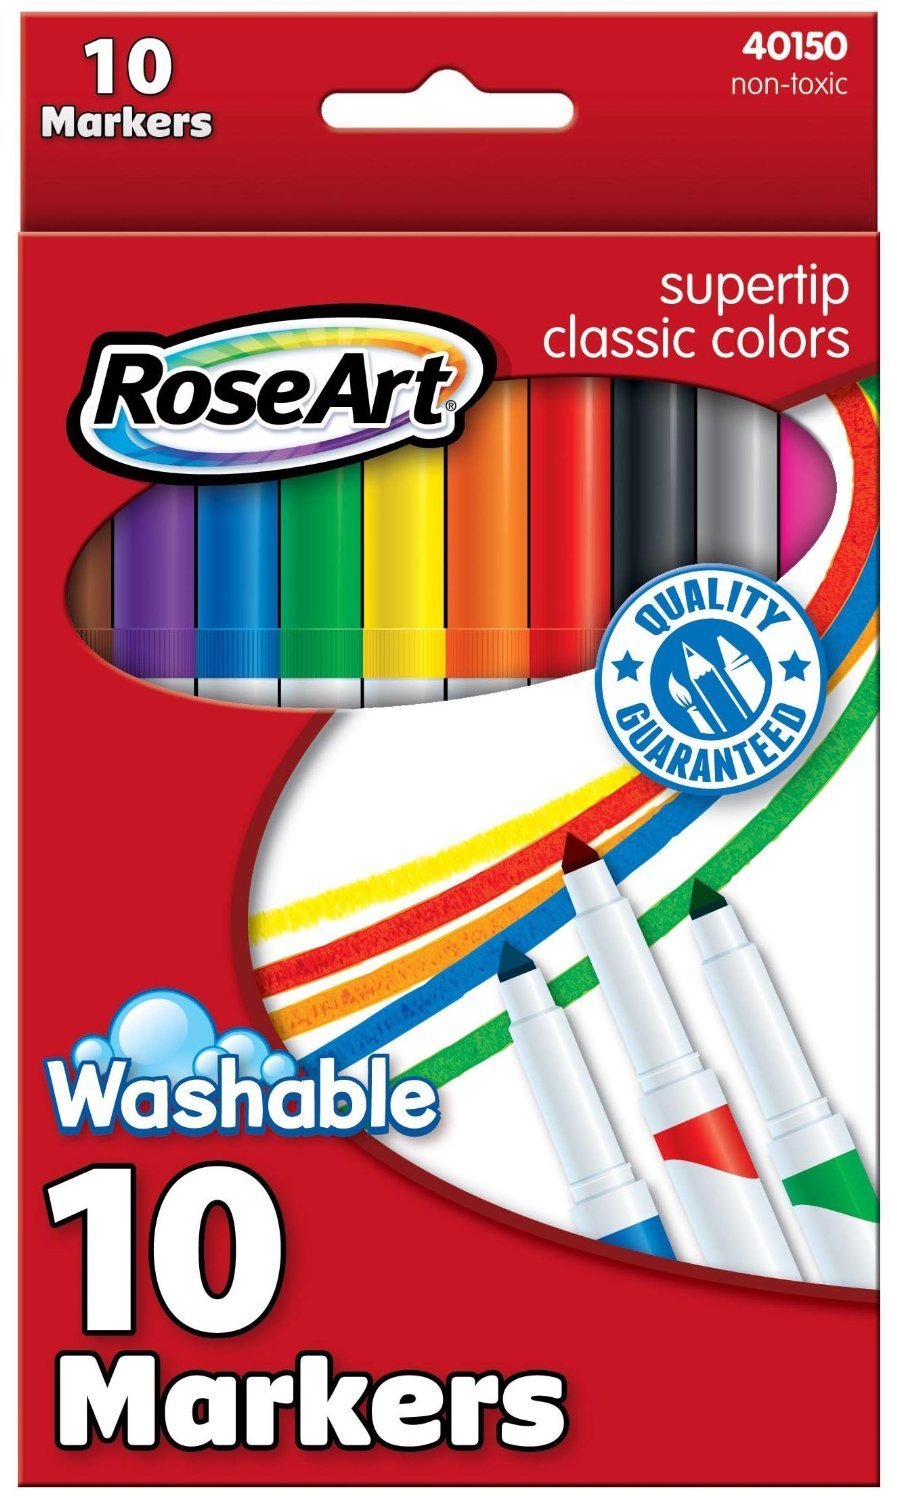 Mattel RoseArt Classic SuperTip Markers, 10-Count, Packaging May Vary DDR90